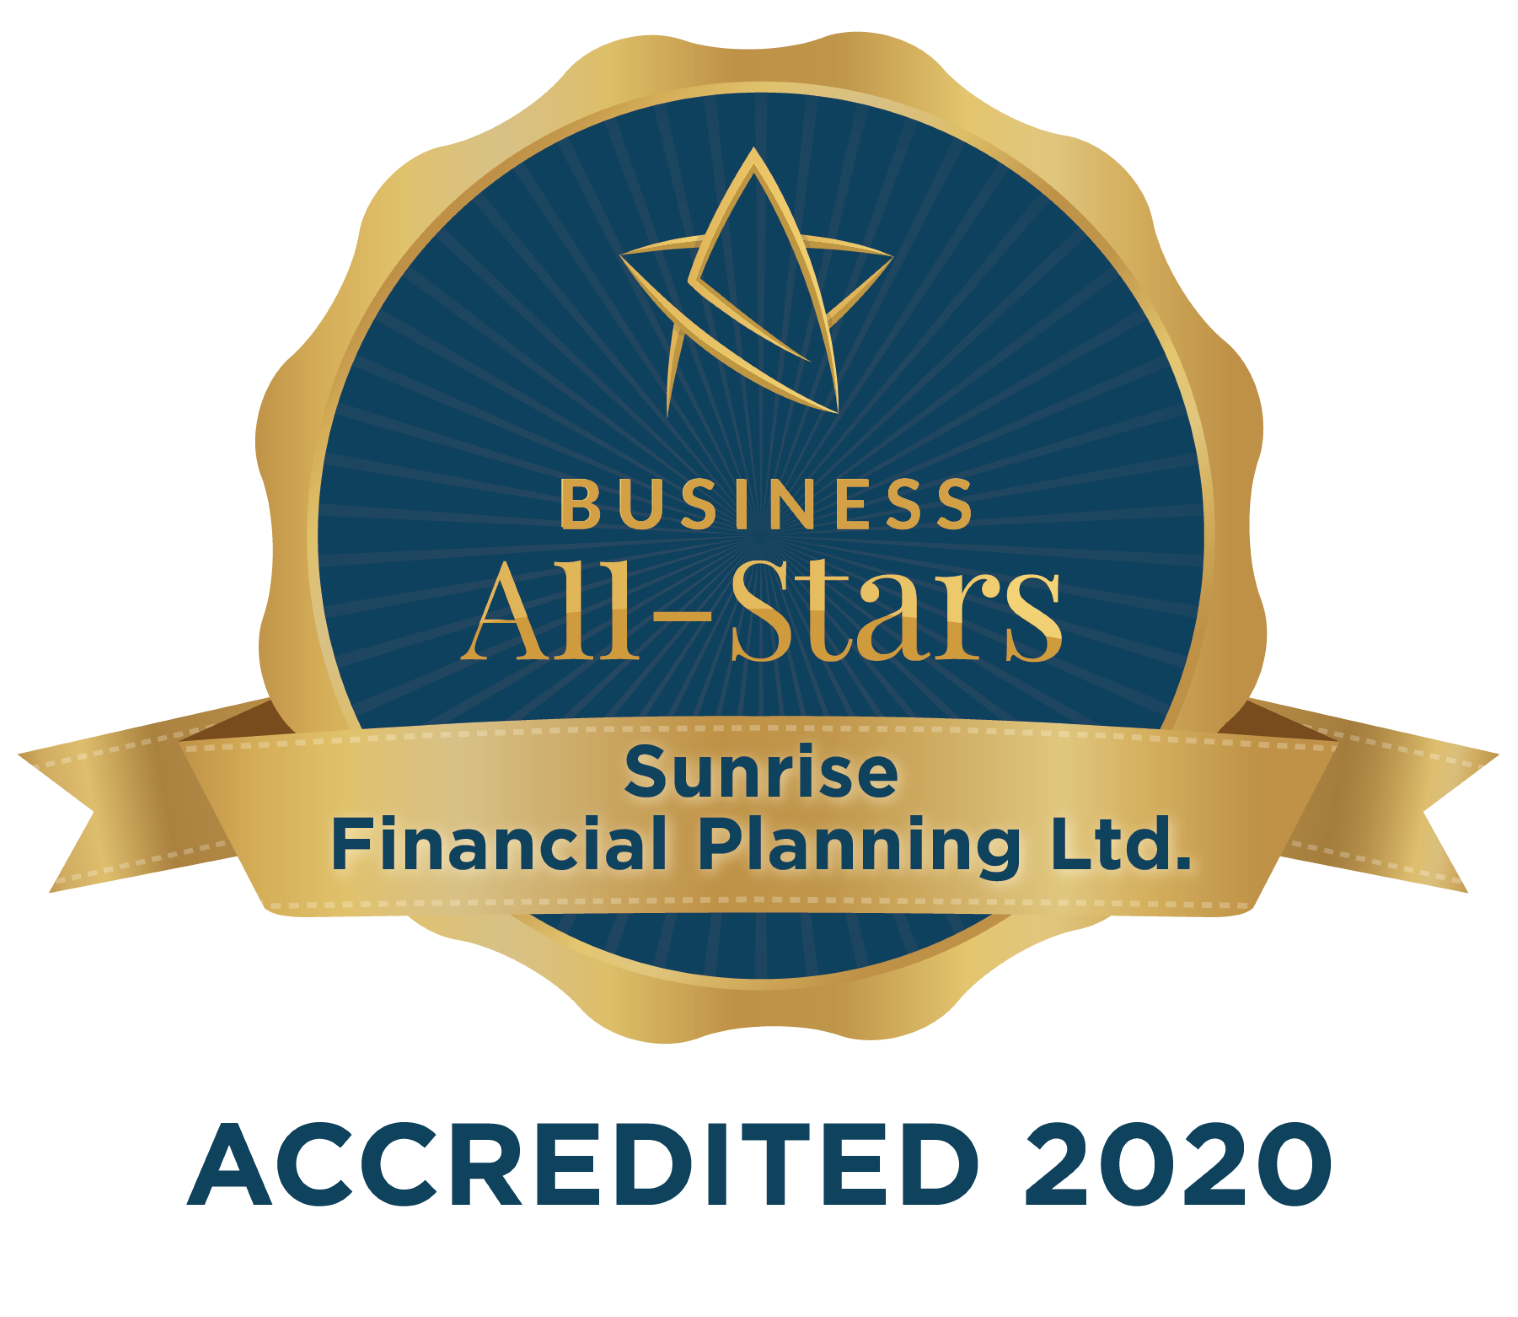 2020 – Business All-Star Award for Sunrise Financial Planning